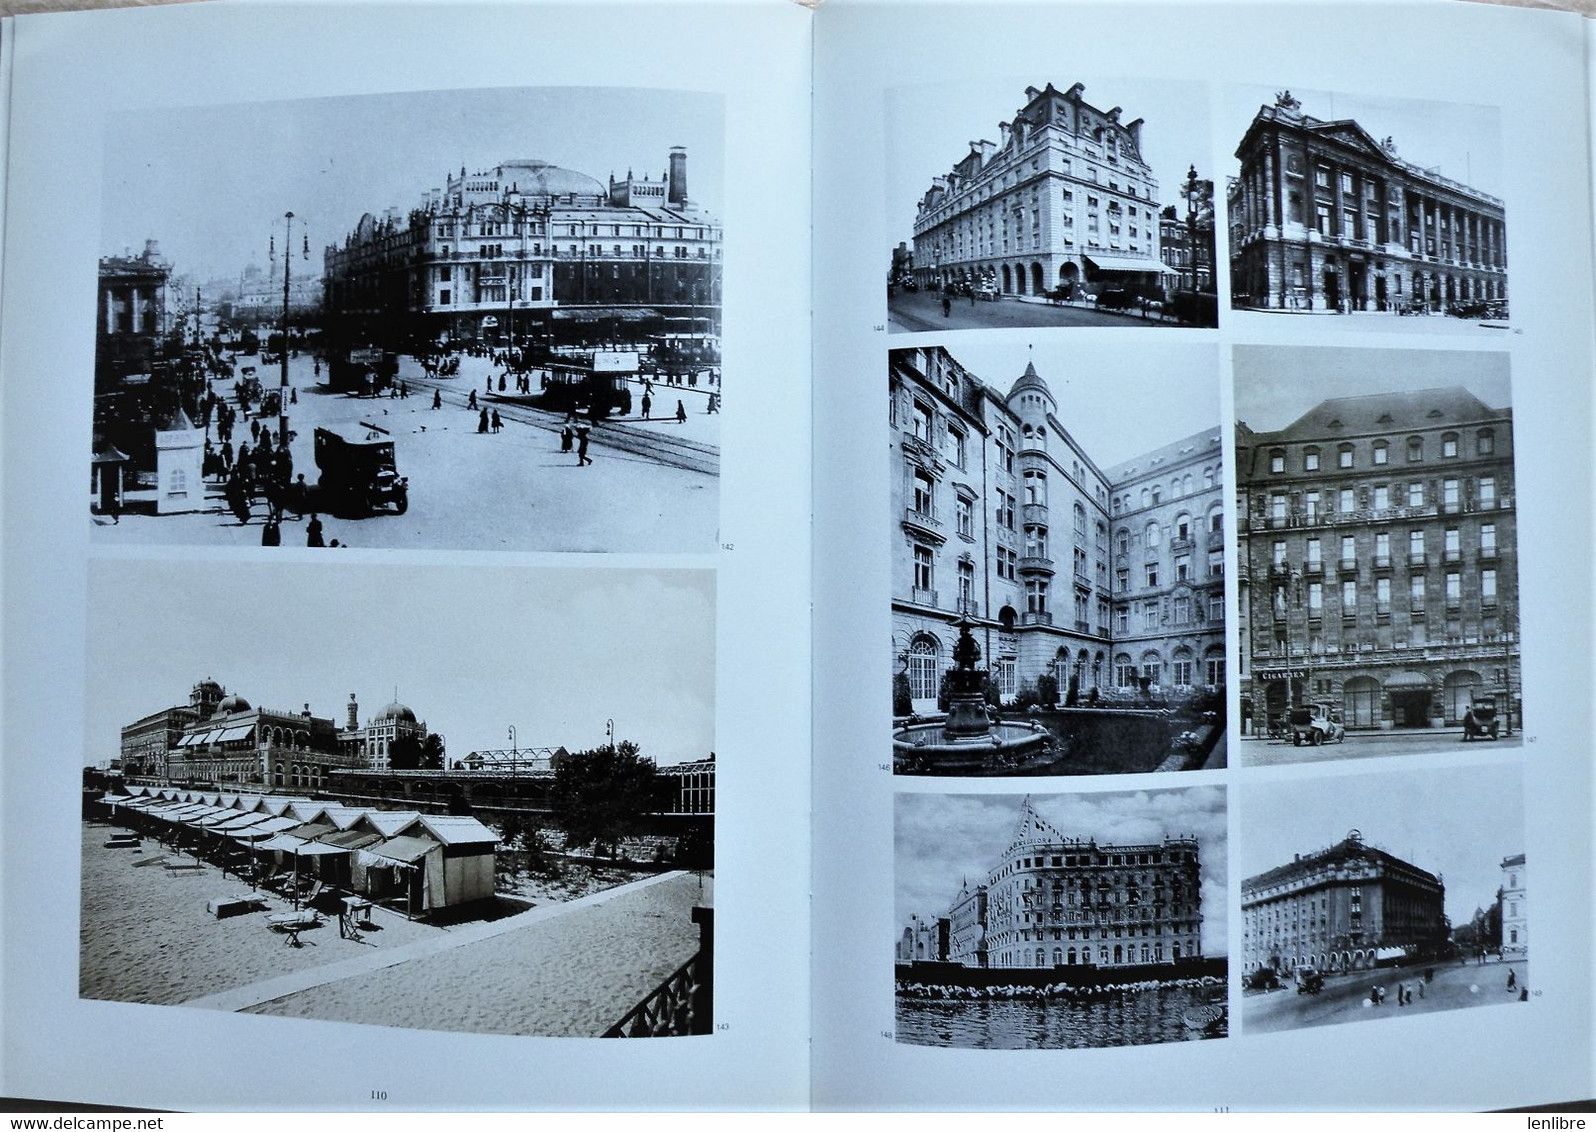 GRAND HOTEL, The Golden Age Of Palace Hotels, An Architectural And Social. 1984. - Culture